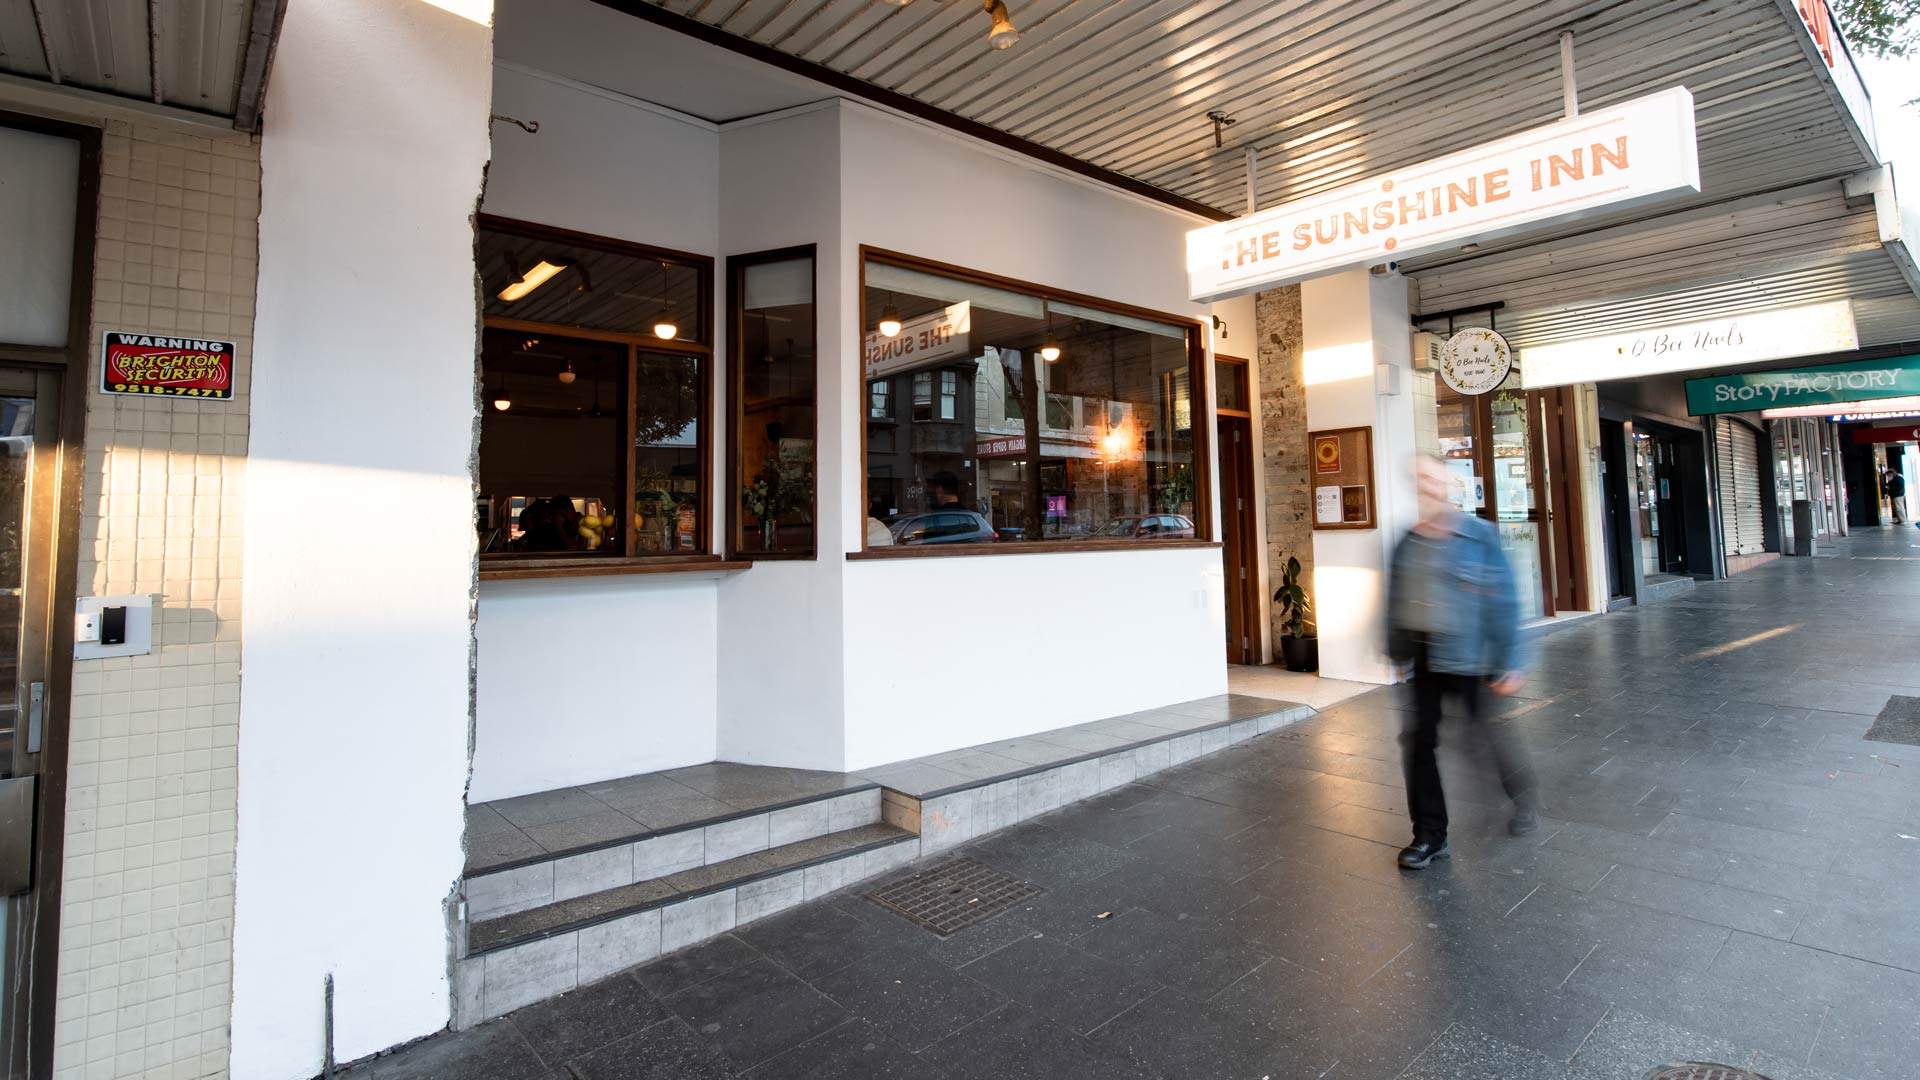 The Sunshine Inn Is the New Vegetarian Restaurant and Cocktail Bar in Redfern Continental's Old Digs